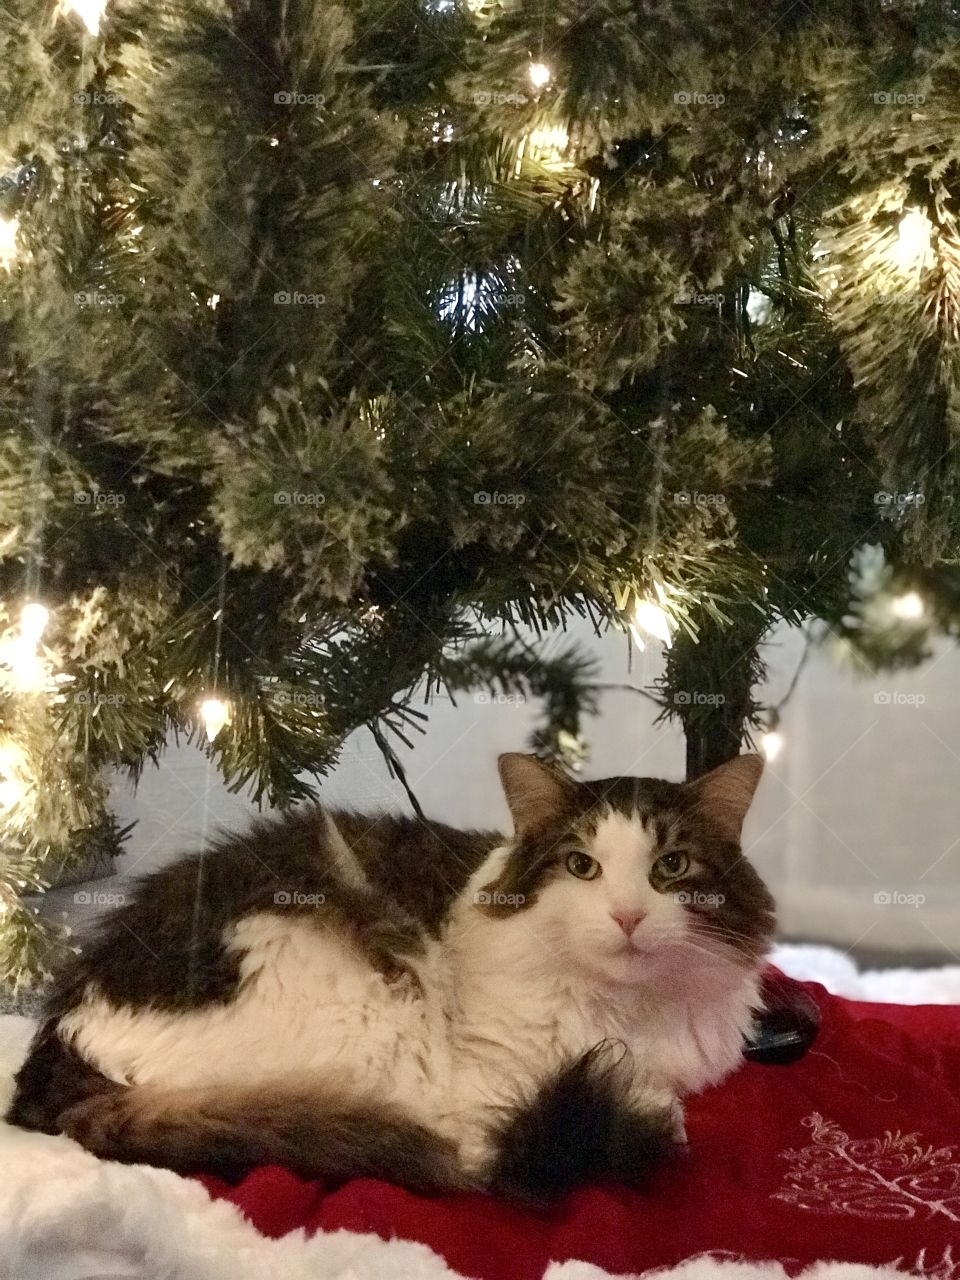 Kitty all cozy under the Christmas tree waiting for it to be decorated!